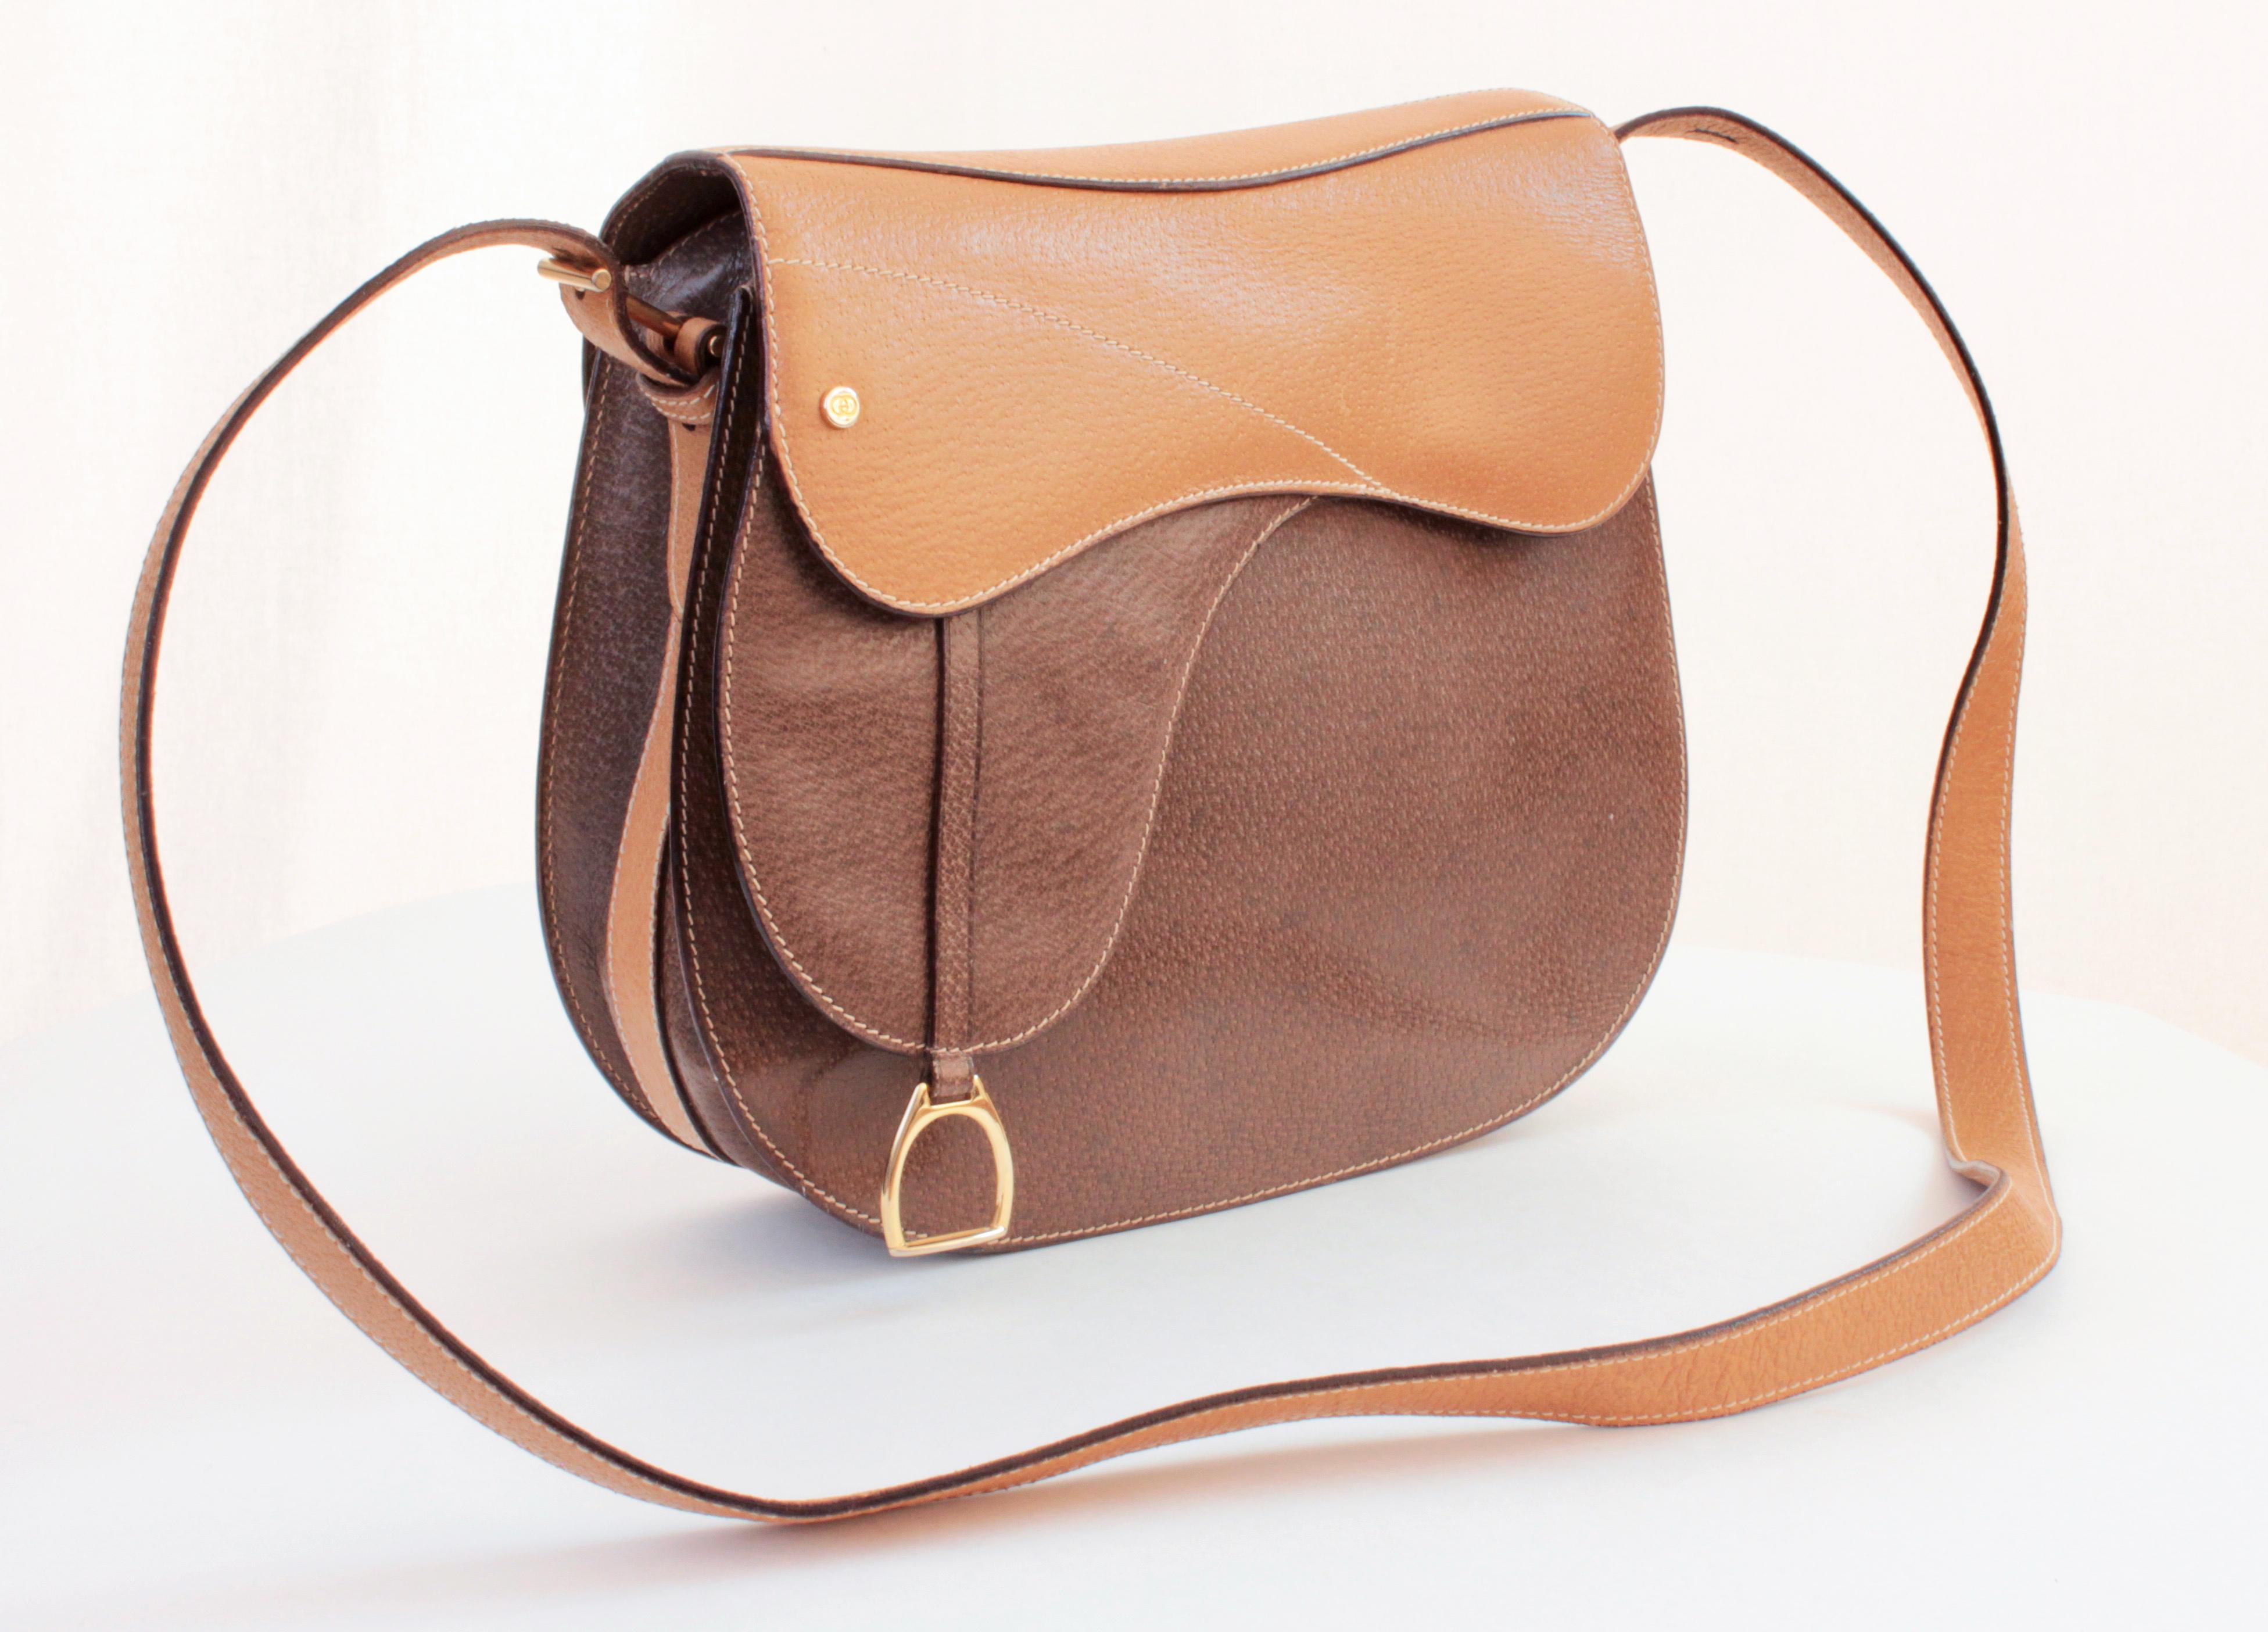 This saddle shaped bag with stirrup charm was made by Gucci, most likely in the early 1980s. Made from pigskin leather in tan and brown, it features an adjustable shoulder strap and inside, there's a flat zip pocket. In excellent condition for its